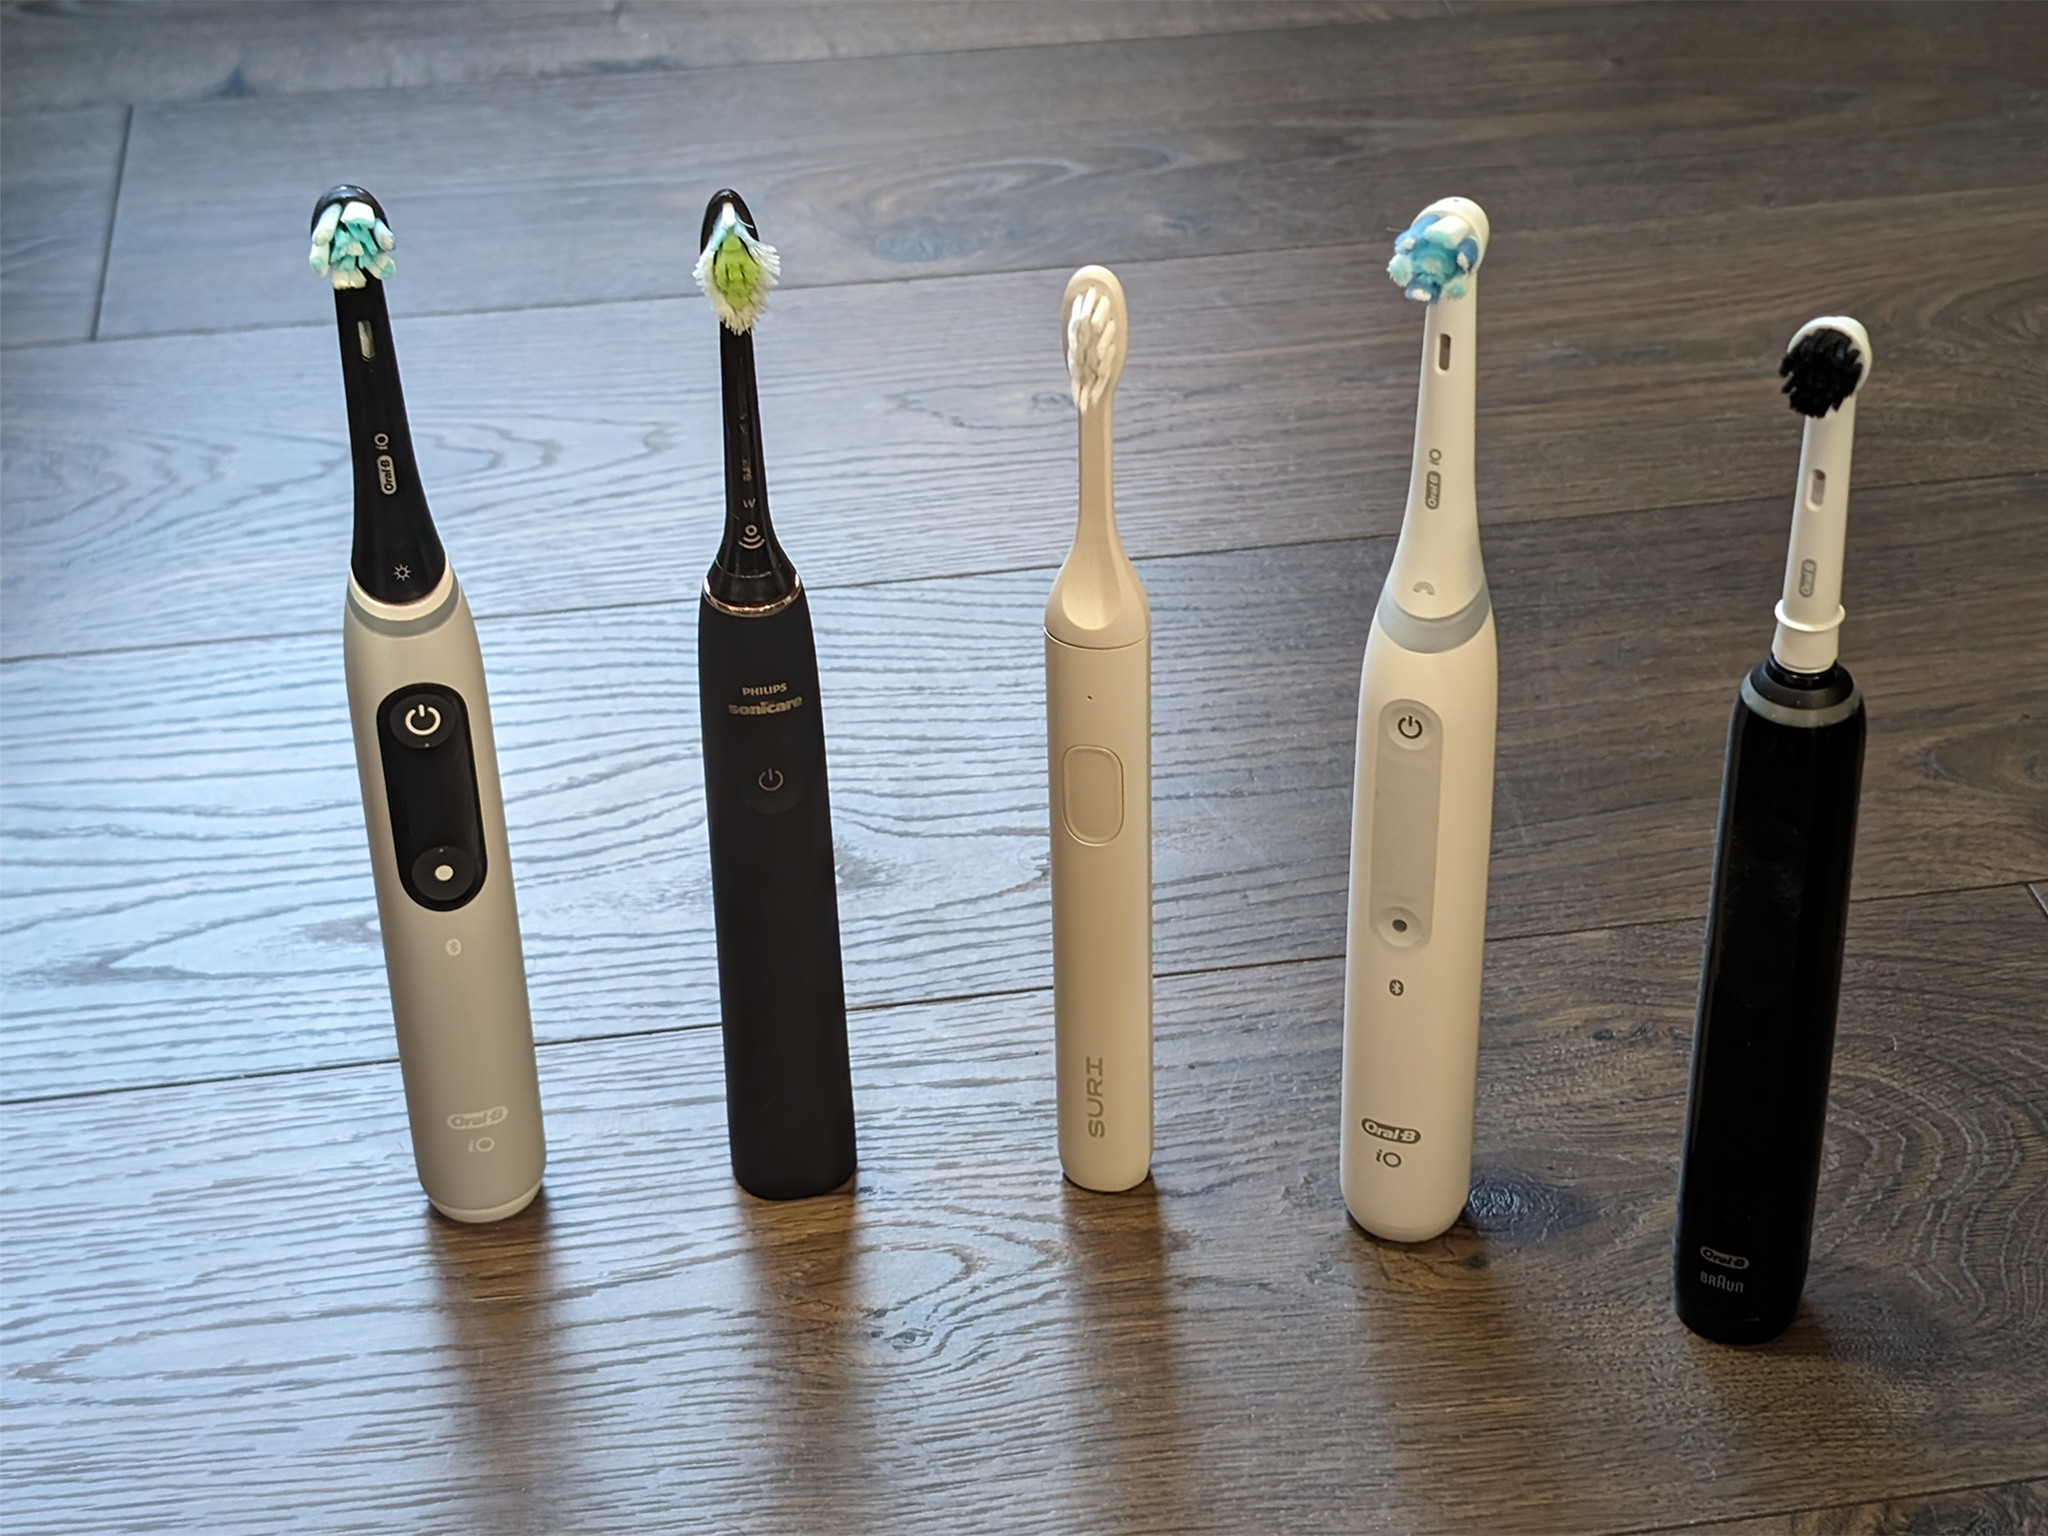 Buy Electric Toothbrushes & Heads – Sonicare, Oral-B, & More